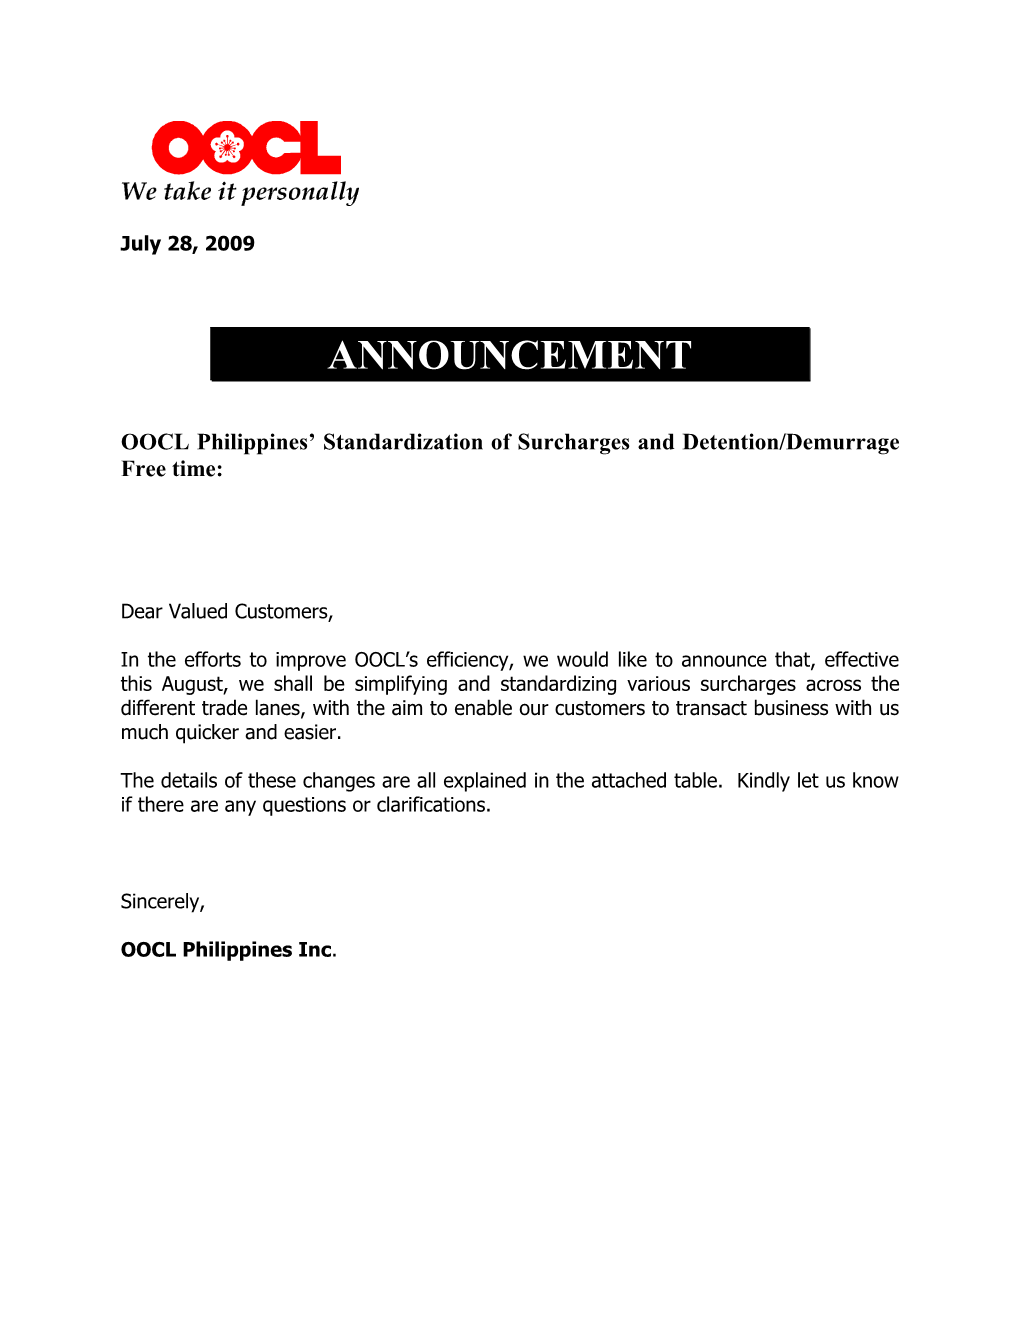 OOCL Philippines Standardization of Surcharges and Detention Demurrage Free Time